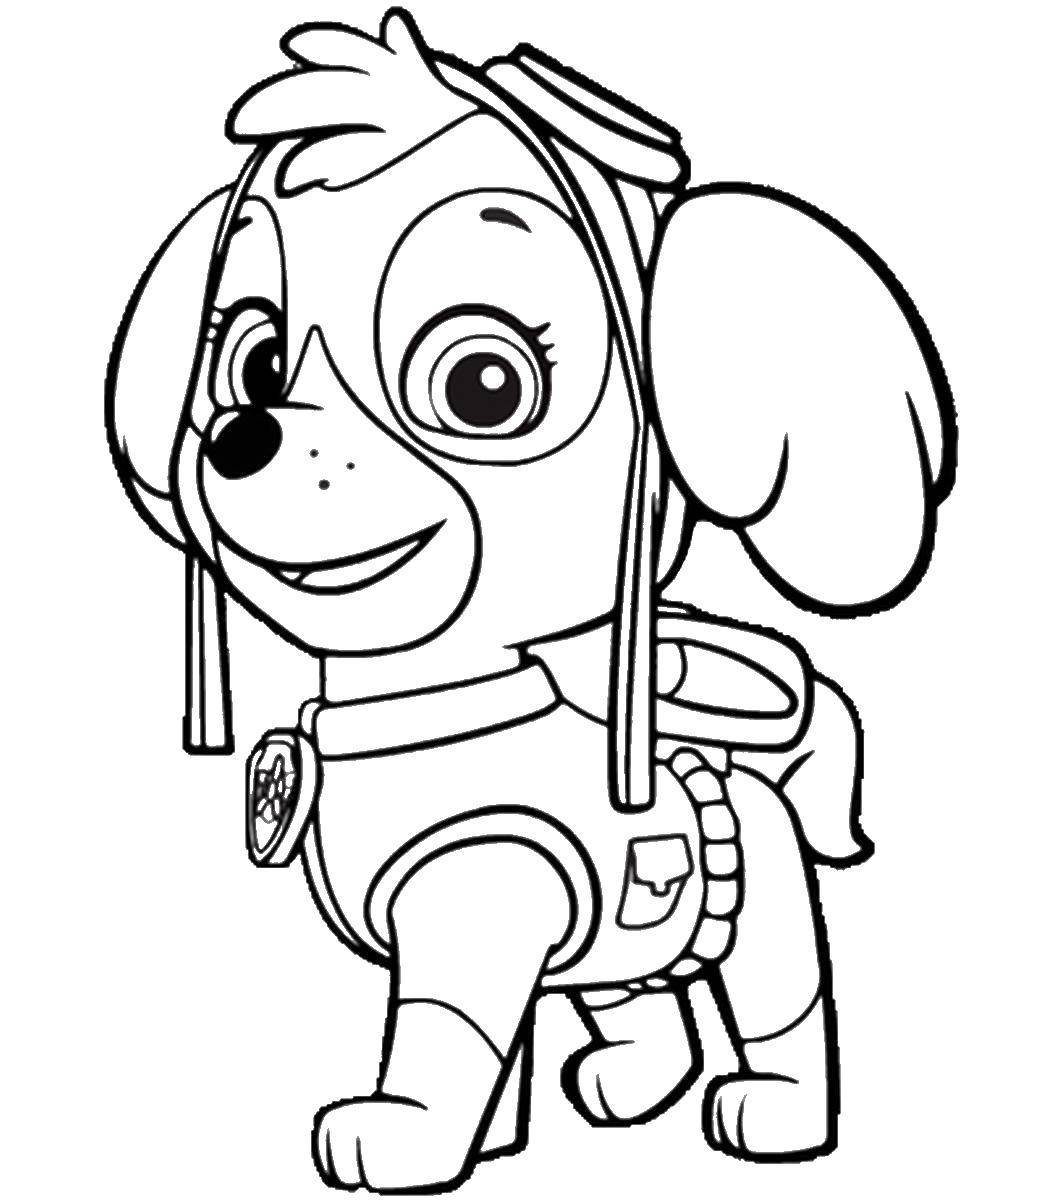 Coloring Skye the Cockapoo puppy, dressed in a pink suit and glasses pilot. Category paw patrol. Tags:  Skye, paw patrol.